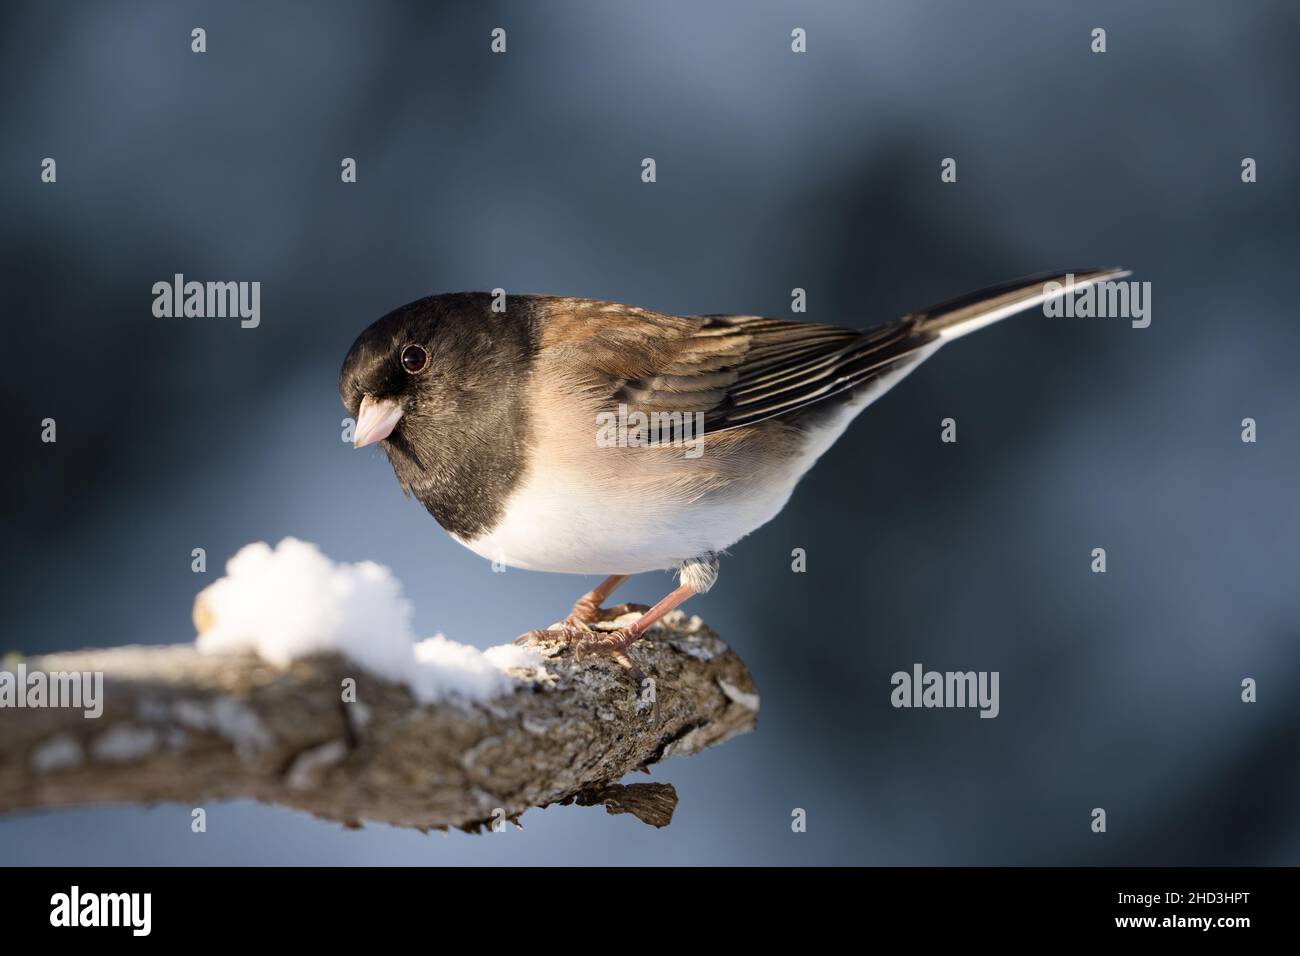 Male dark-eyed junco perched on snowy branch, Snohomish, Washington, USA Stock Photo